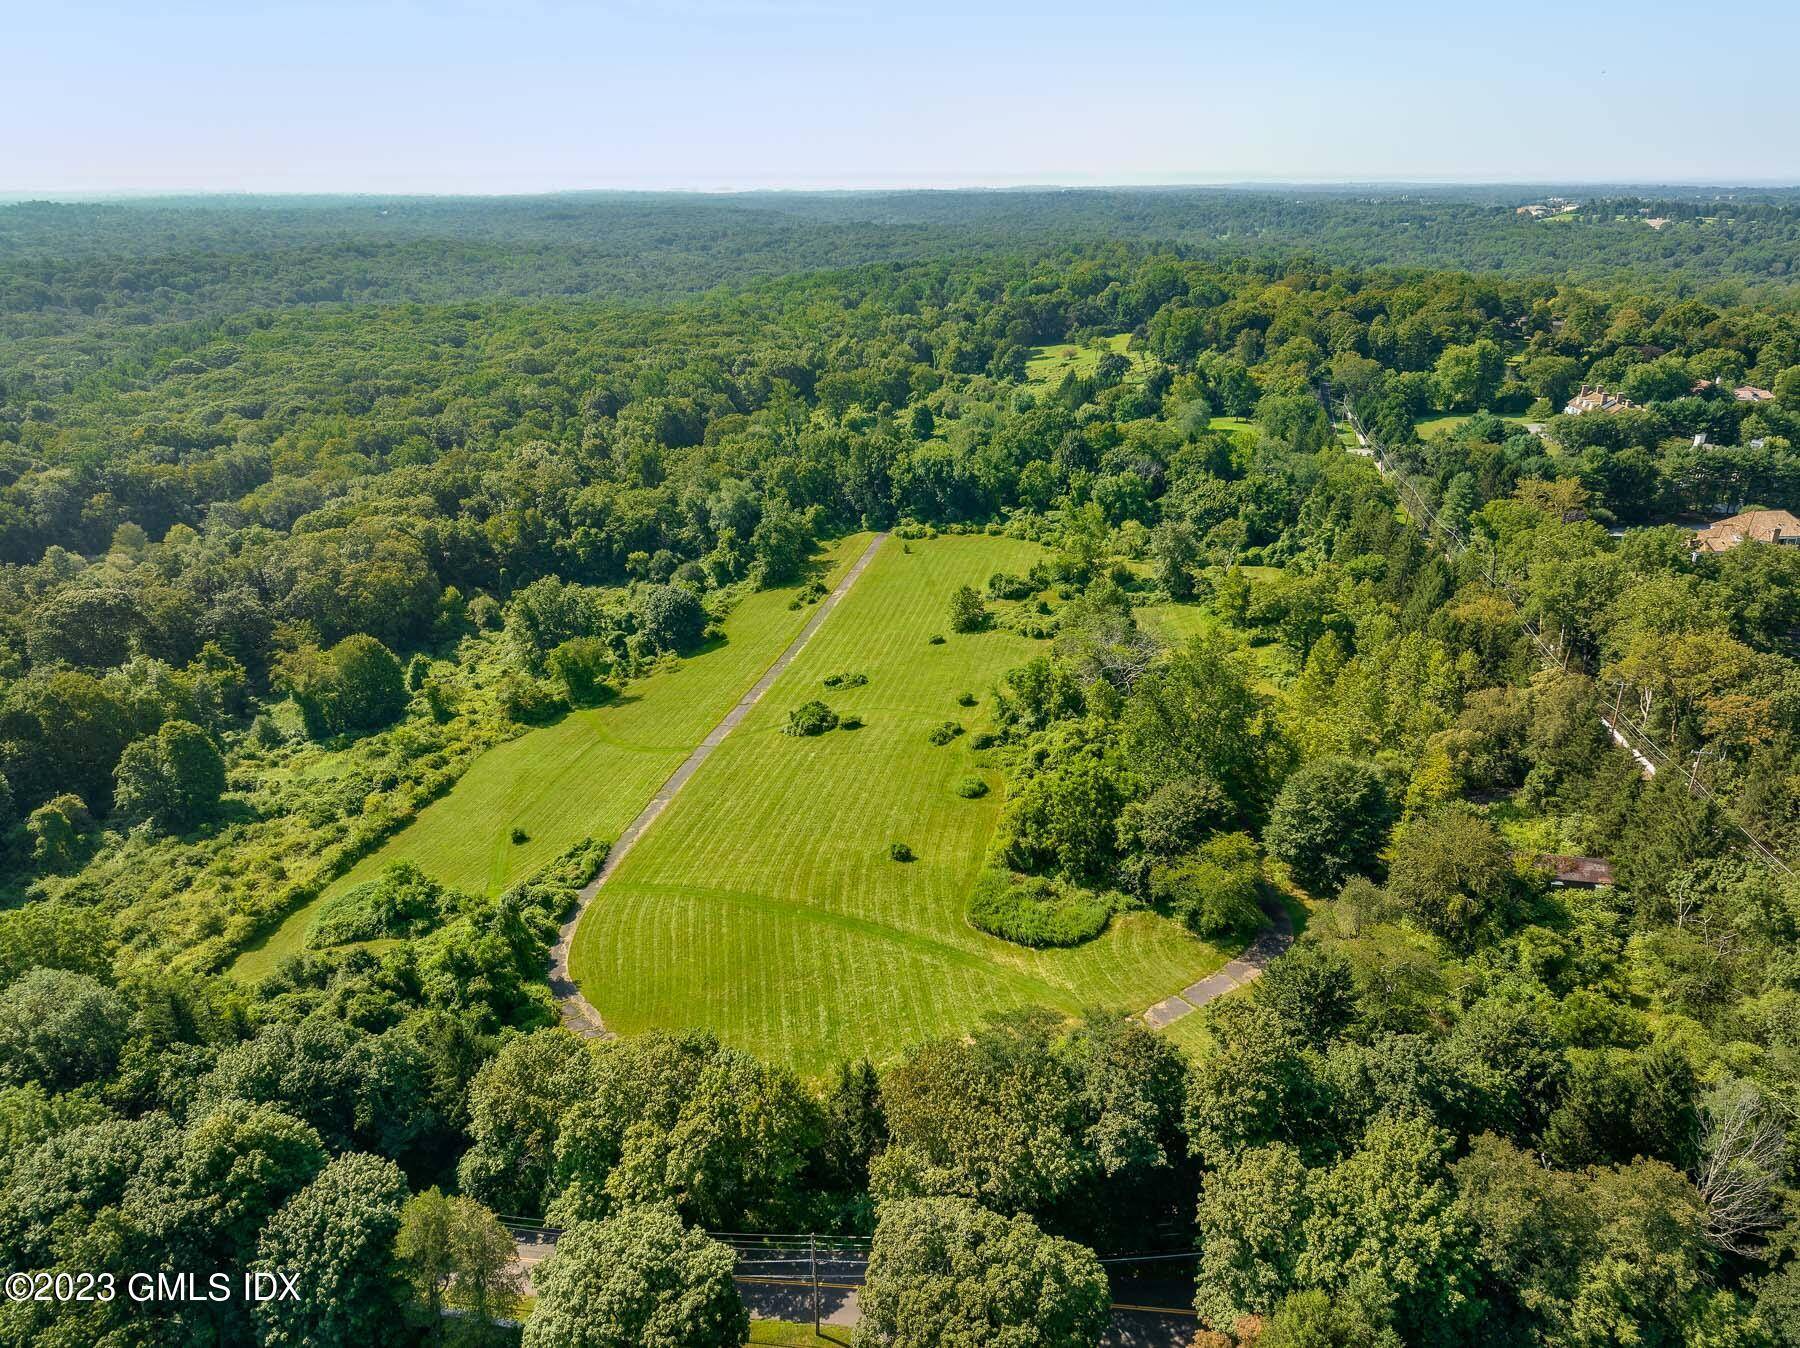 One of Greenwich's most extraordinary landscapes sprawls over 31.